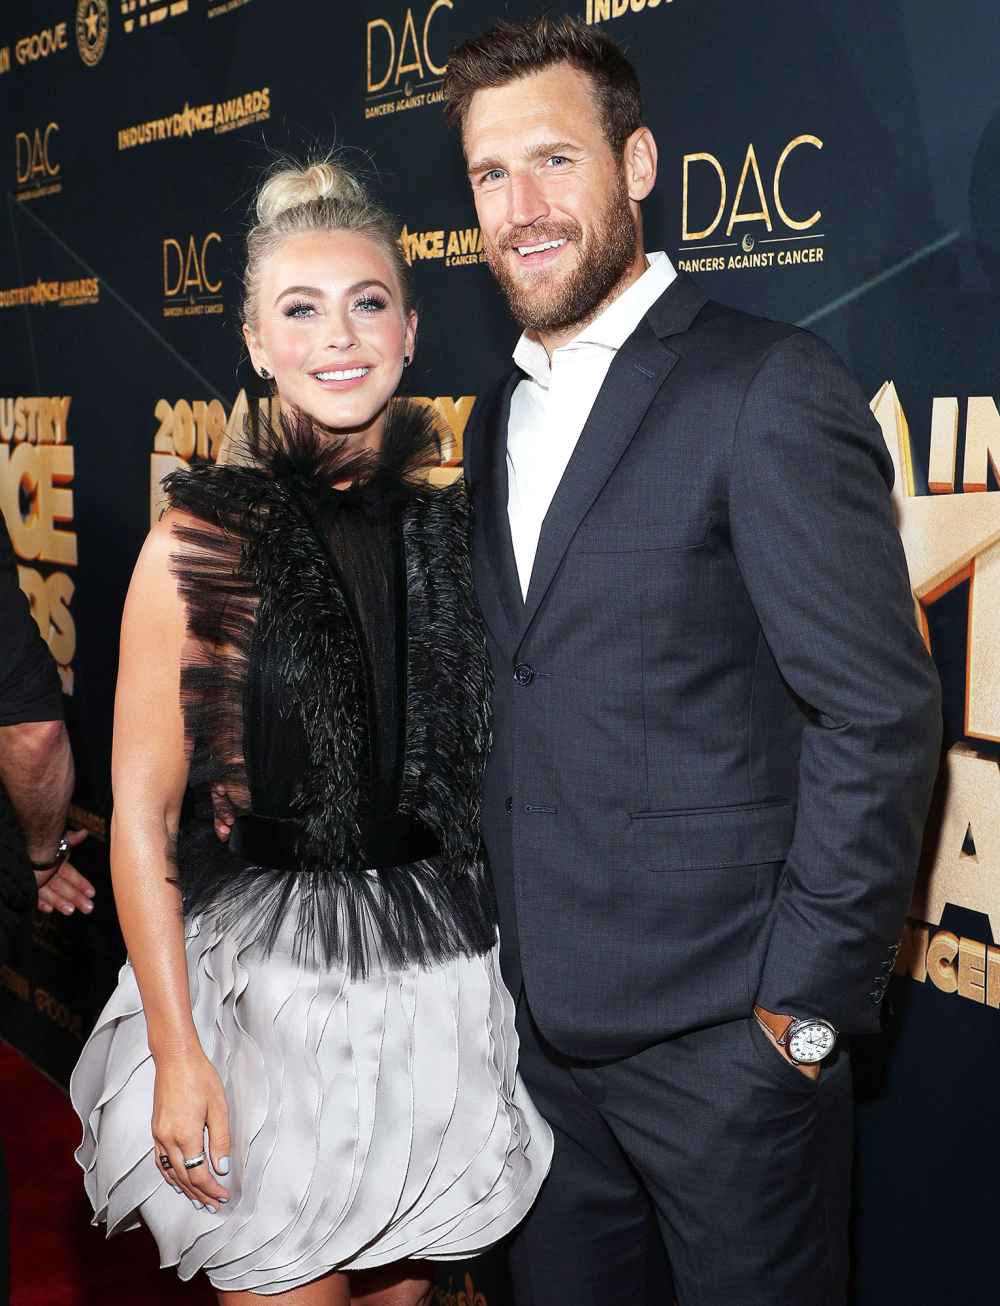 Julianne Hough and Brooks Laich attend the Industry Dance Awards and Cancer Benefit Show Where Riawna Capri Says Julianne Hough and Brooks Laich Are Good Together Amid Marital Issues